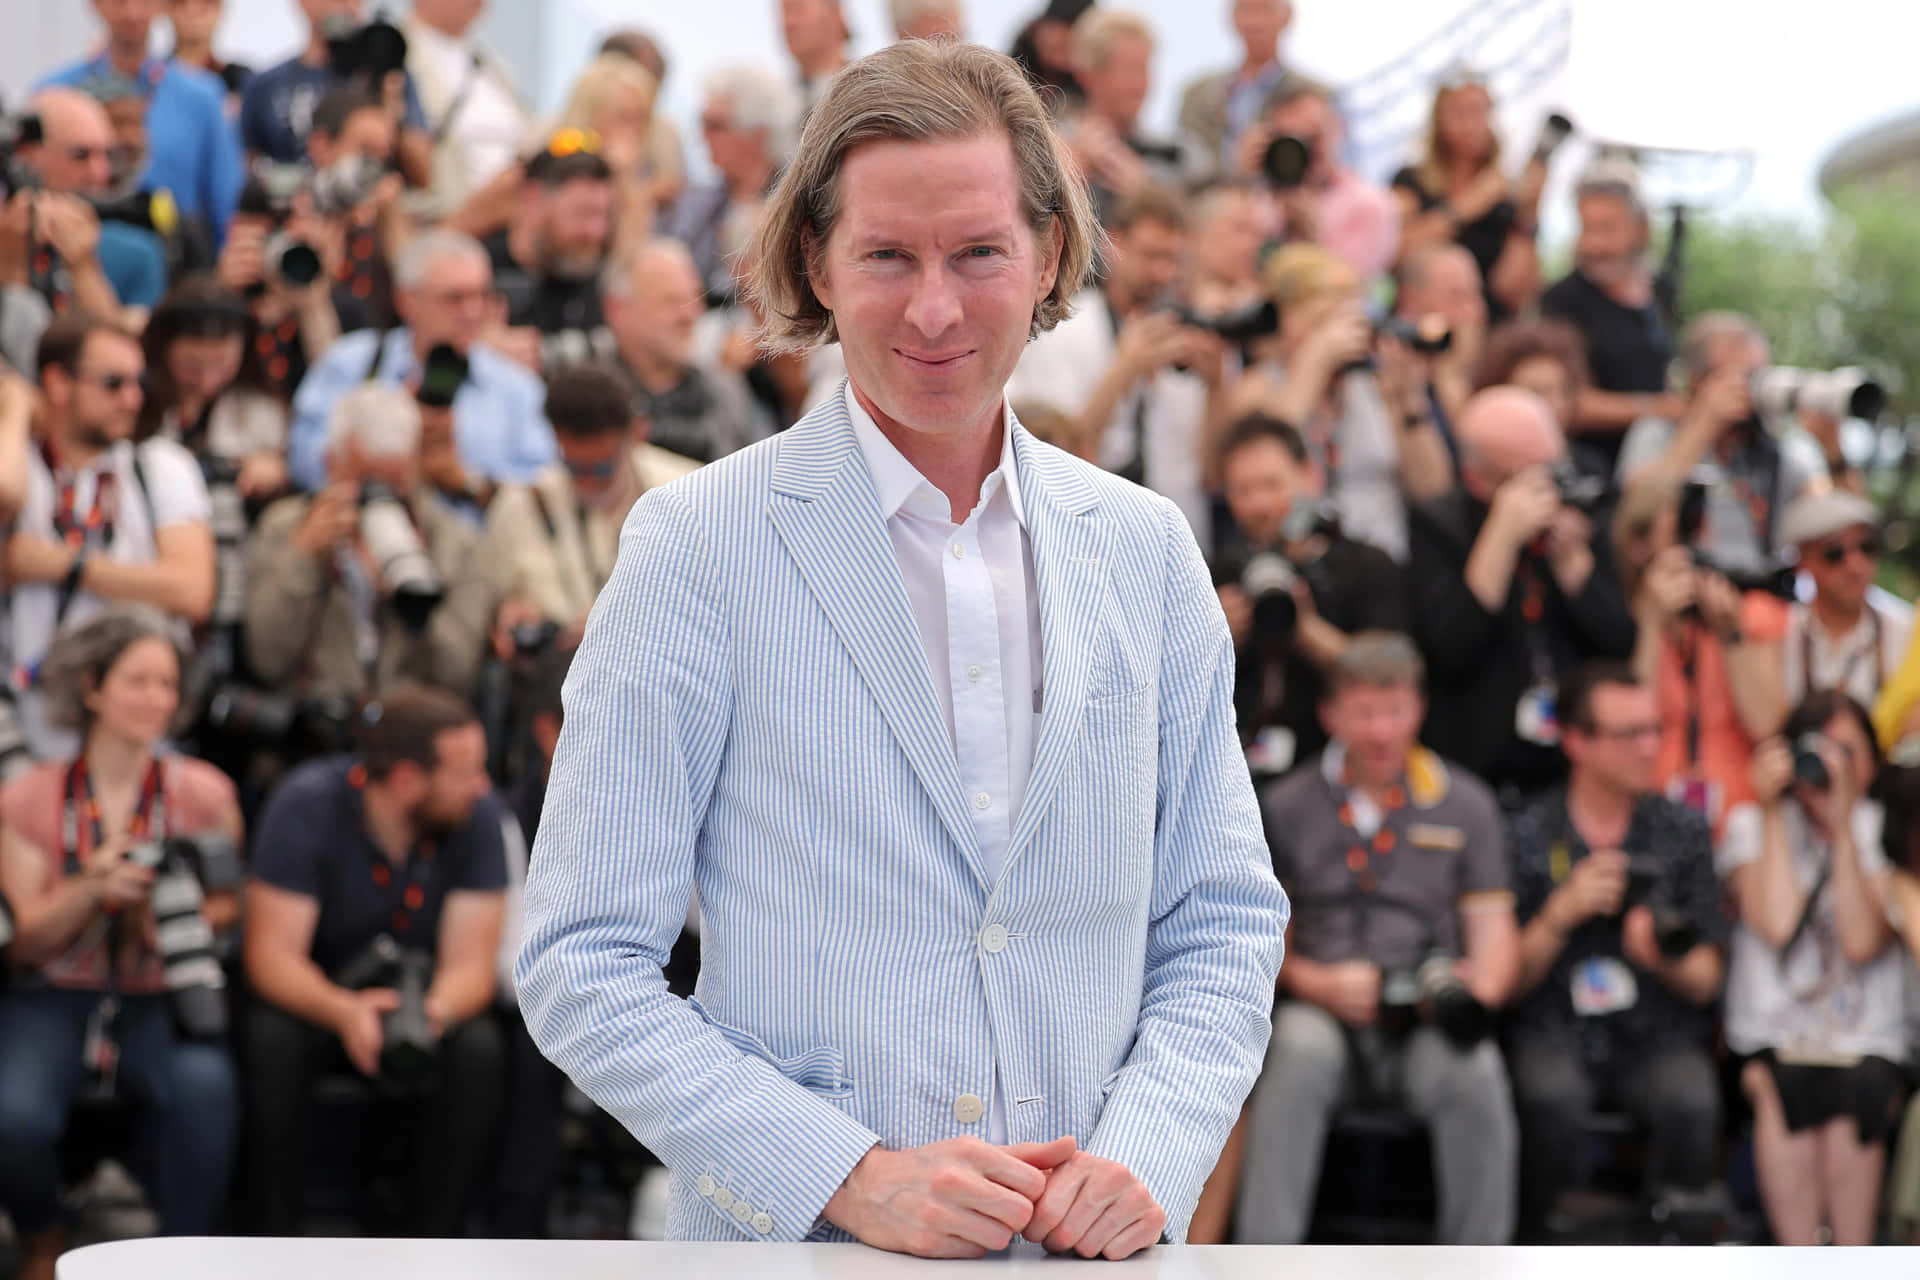 Wes Anderson Film Festival Appearance Wallpaper